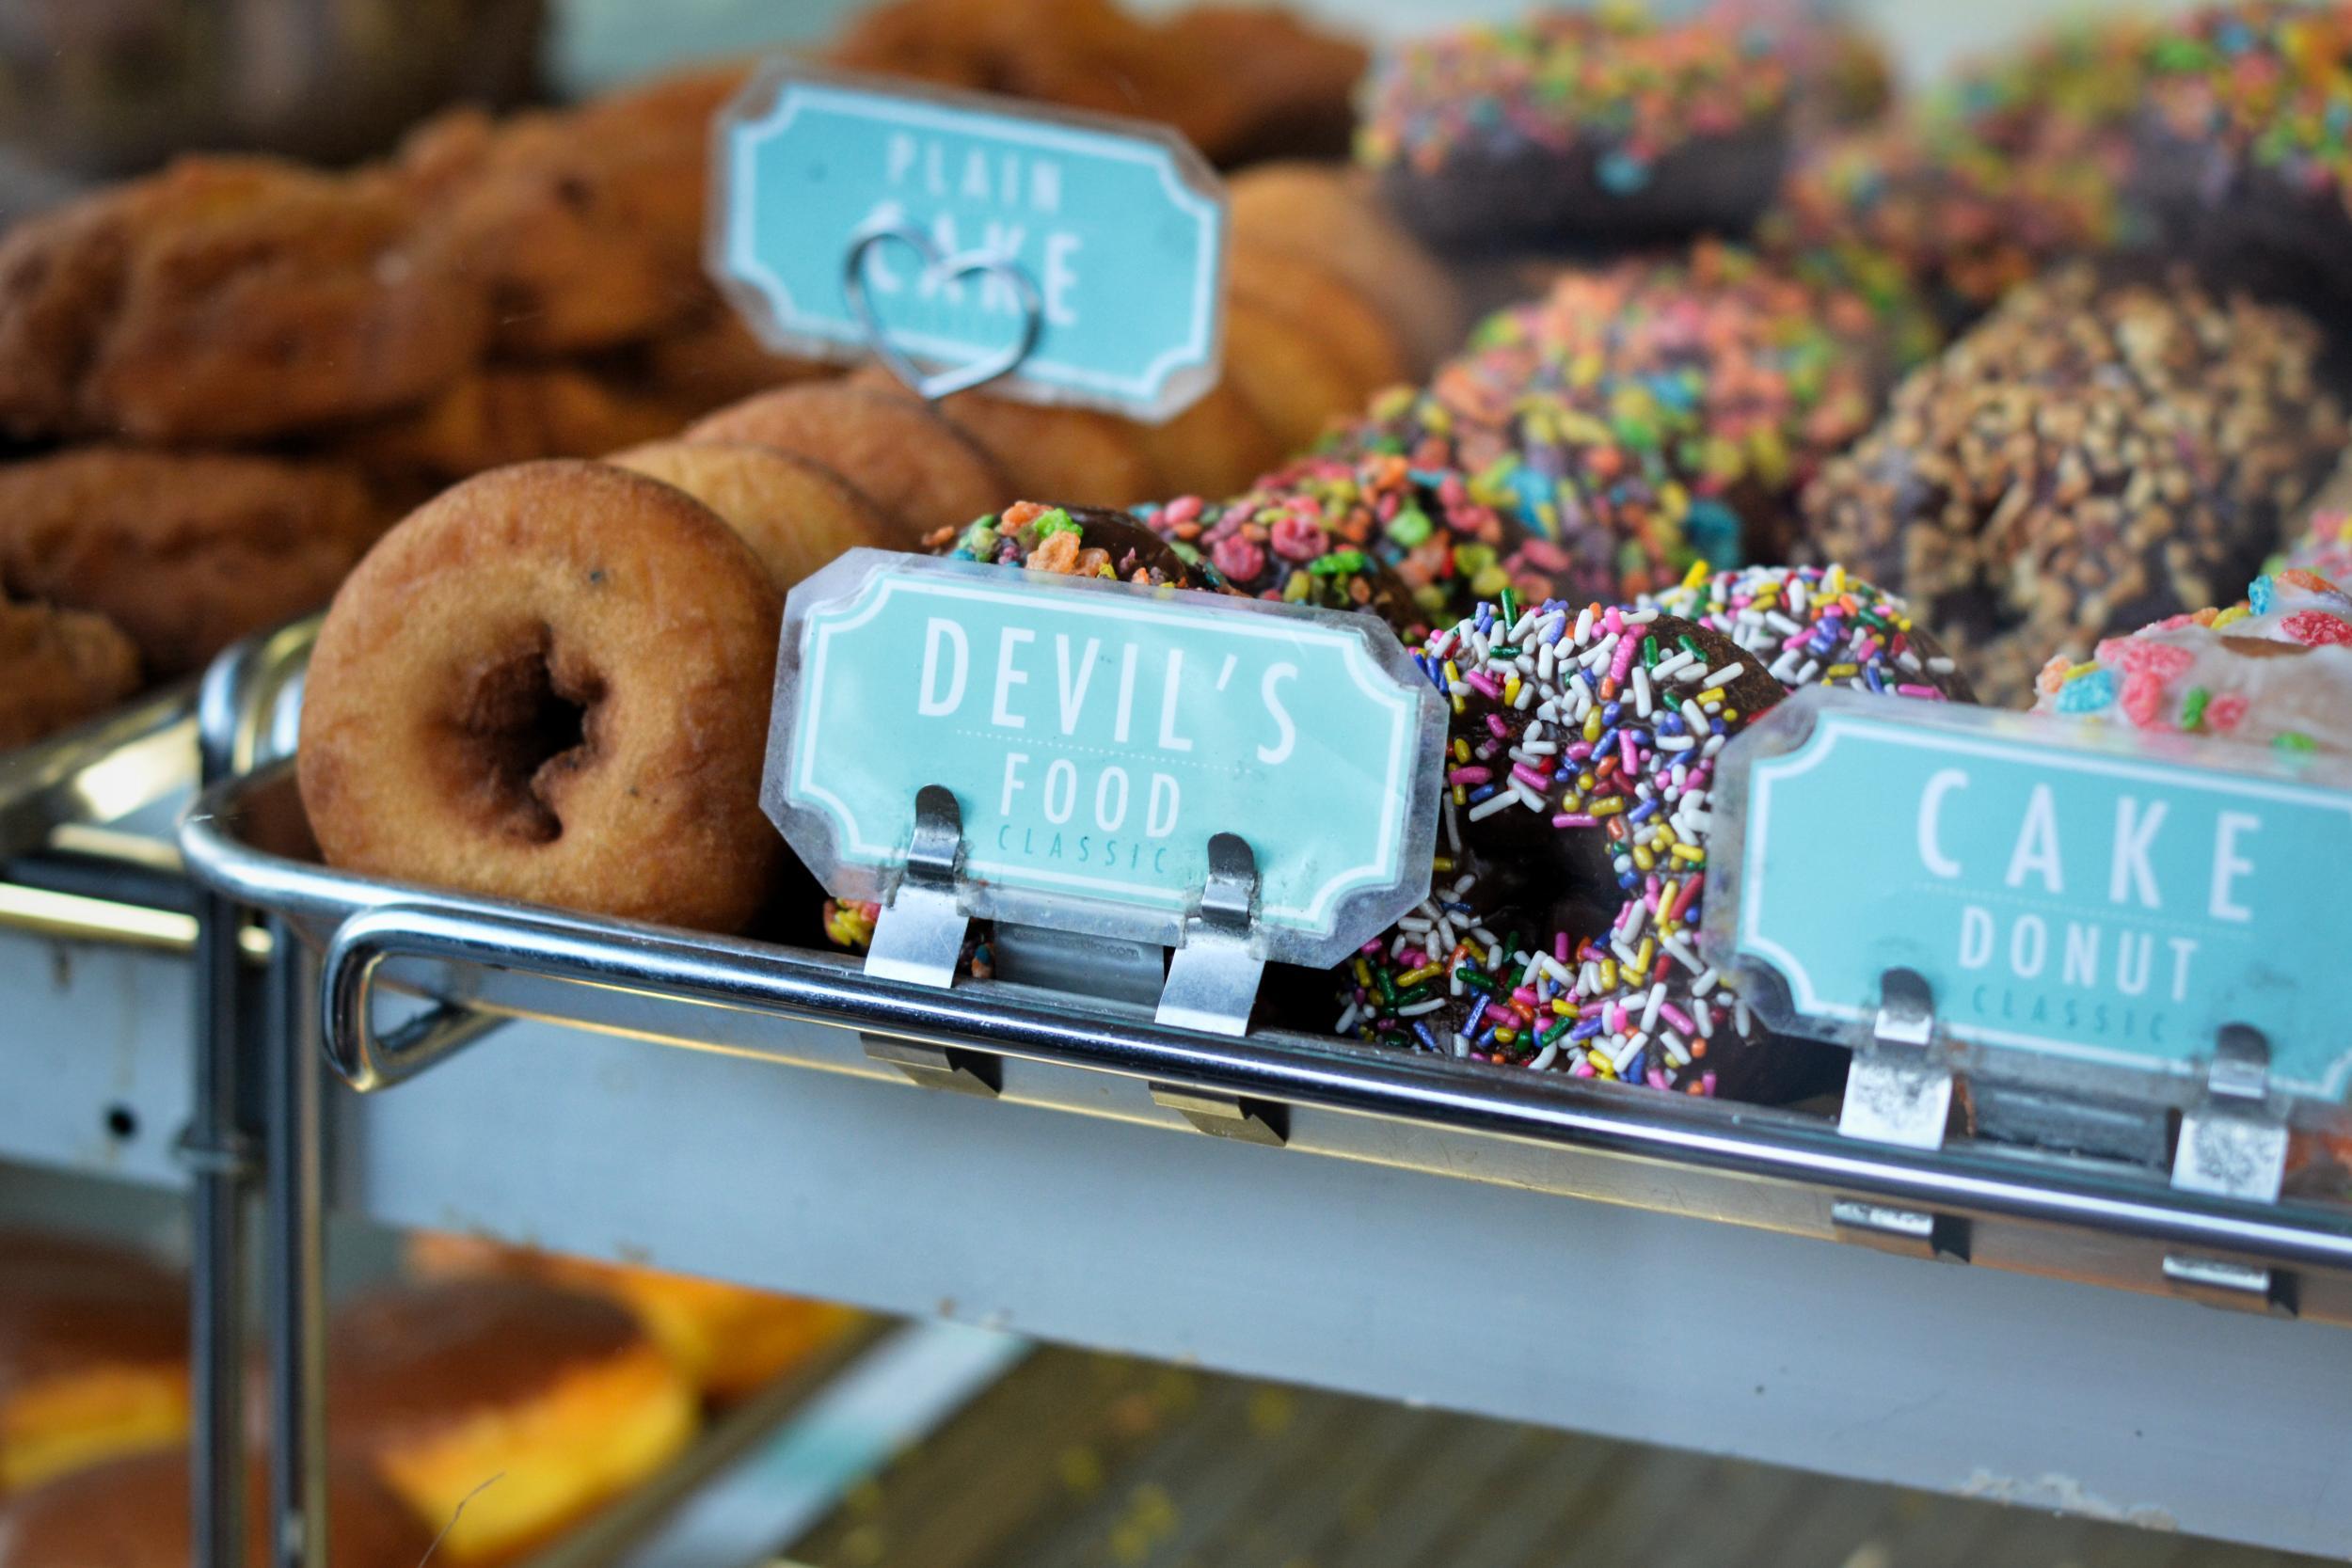 Fill that hole: soaking up the night's booze at California Donuts